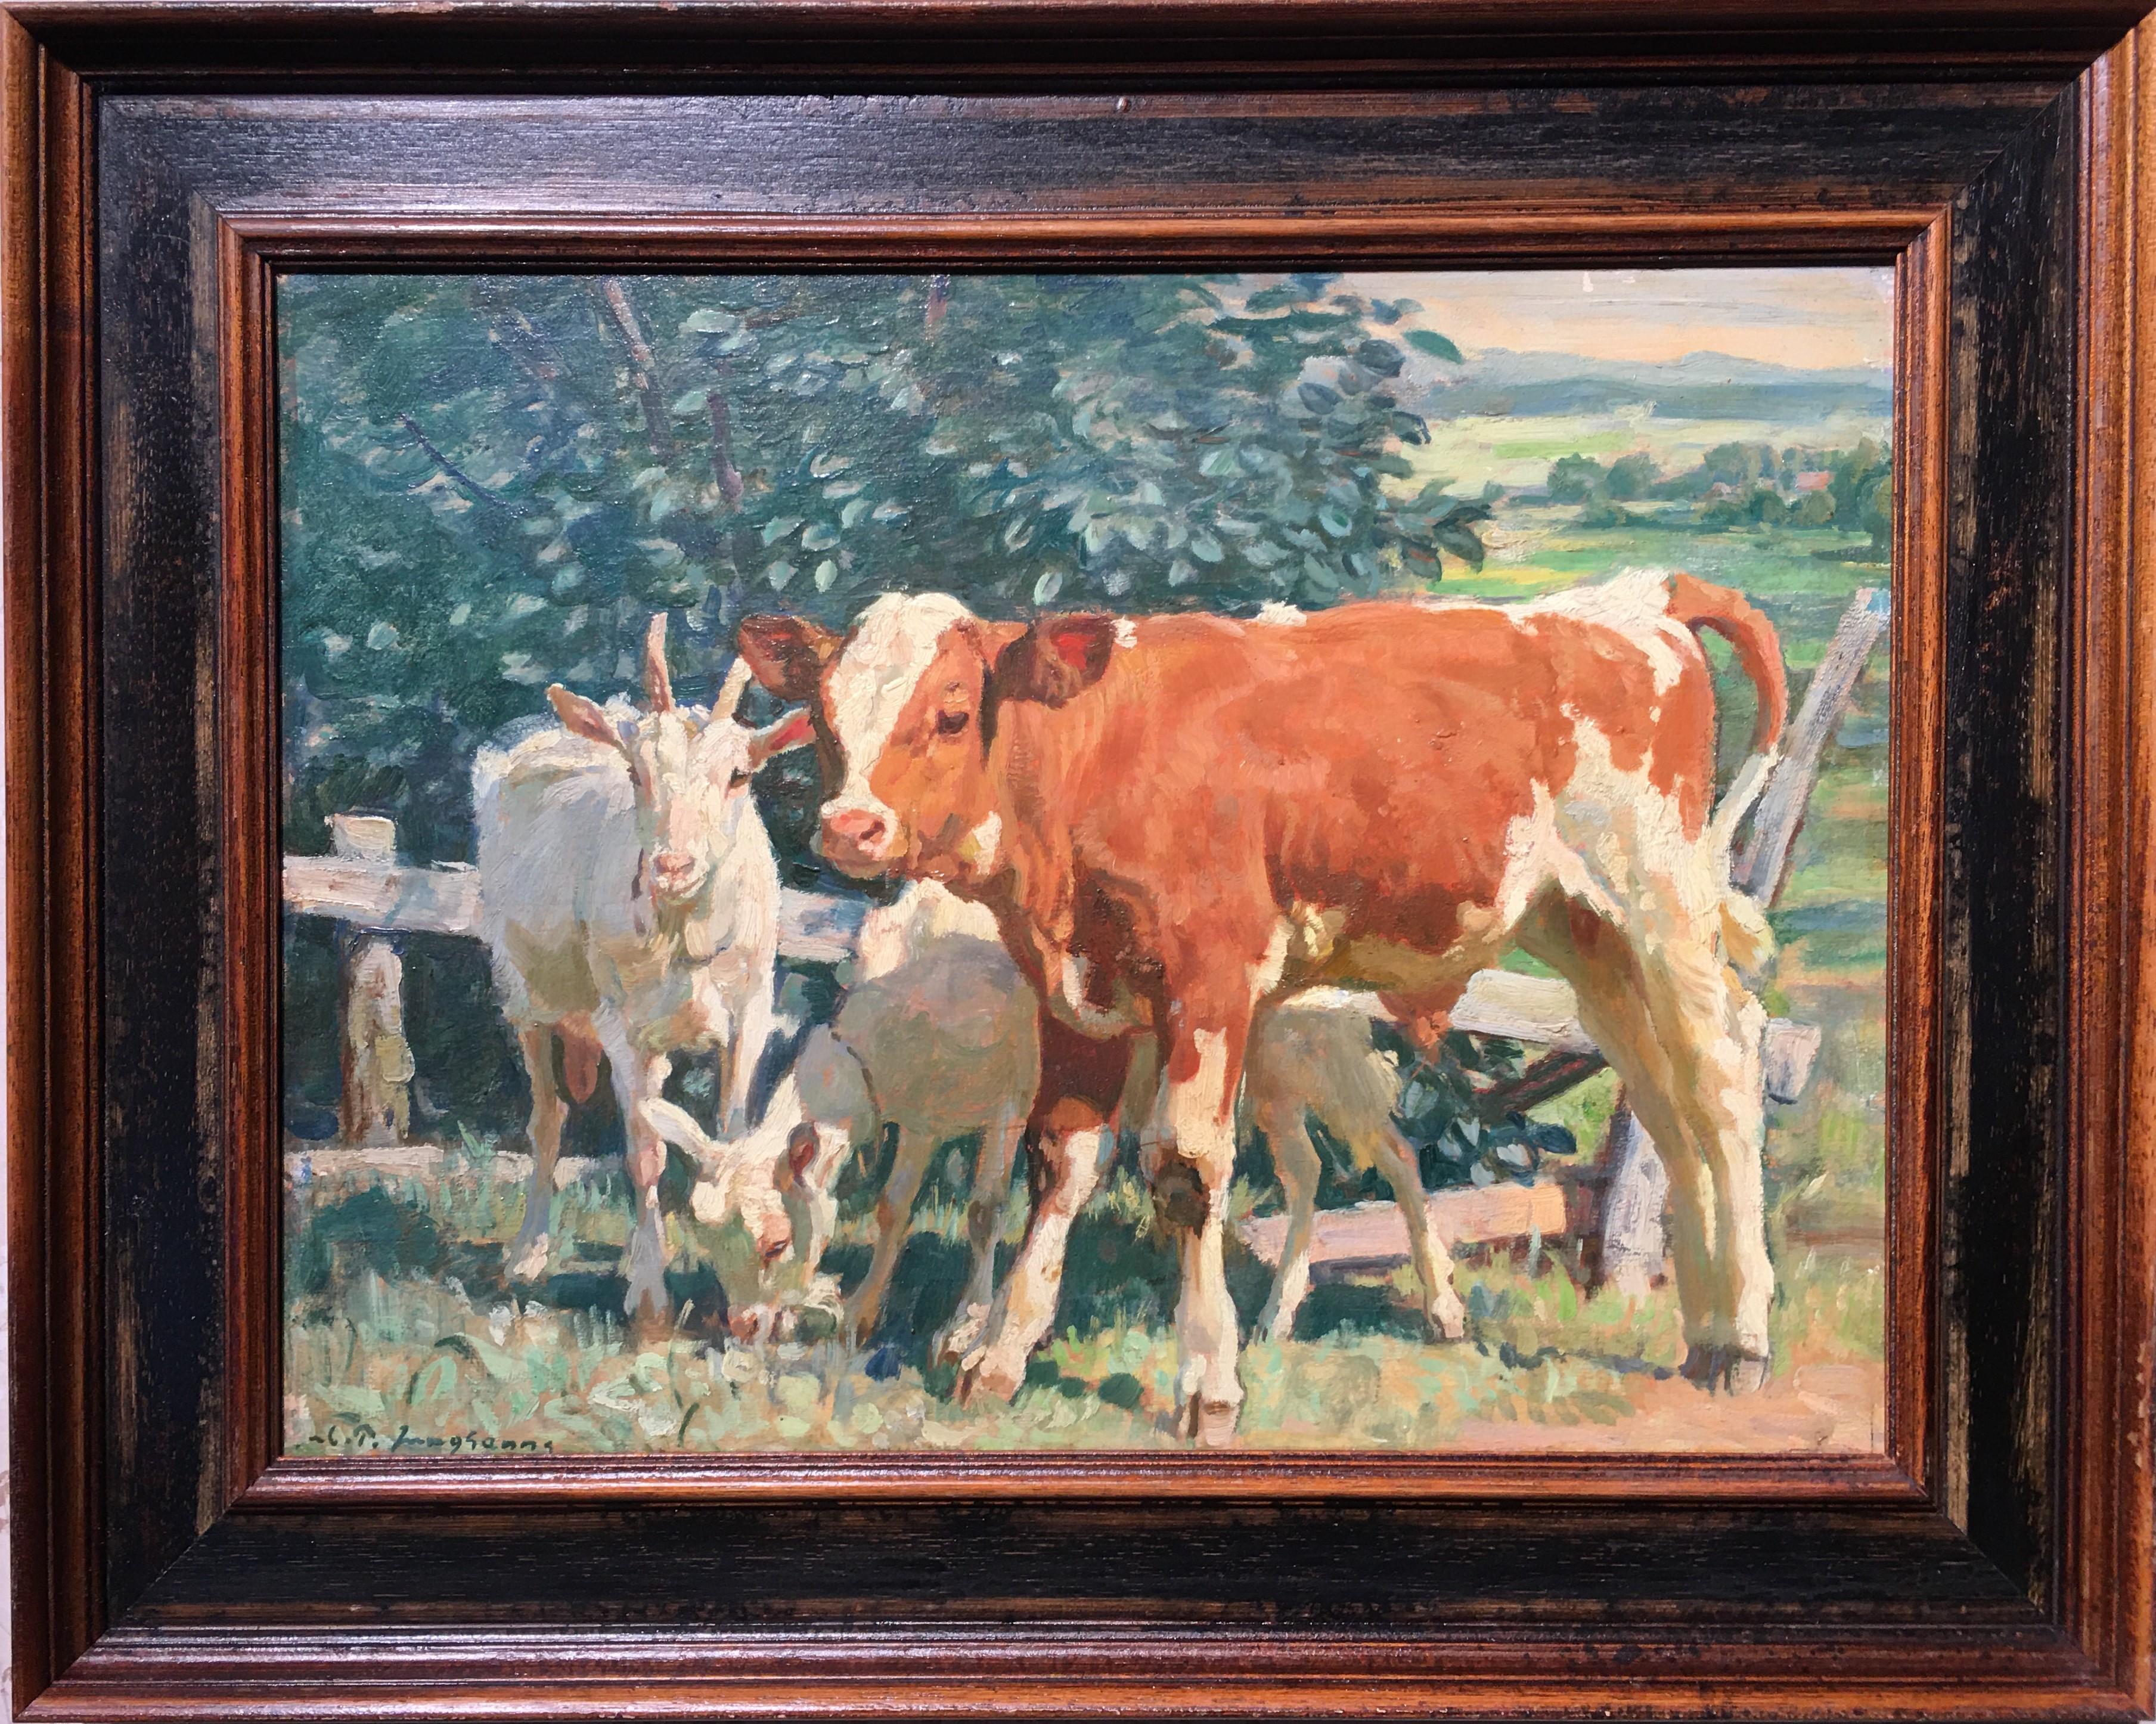 "Calf and Two Goats Grazing in the Meadow" 
Julius Paul Junghanns (German, 1876-1958)
Oil on canvas
Signed lower right
15 1/2 x 11 1/2 (20 x 16 frame) inches

Professor Julius Paul Junghanns (German, 1876-1958) attended the Academy of Fine Arts in